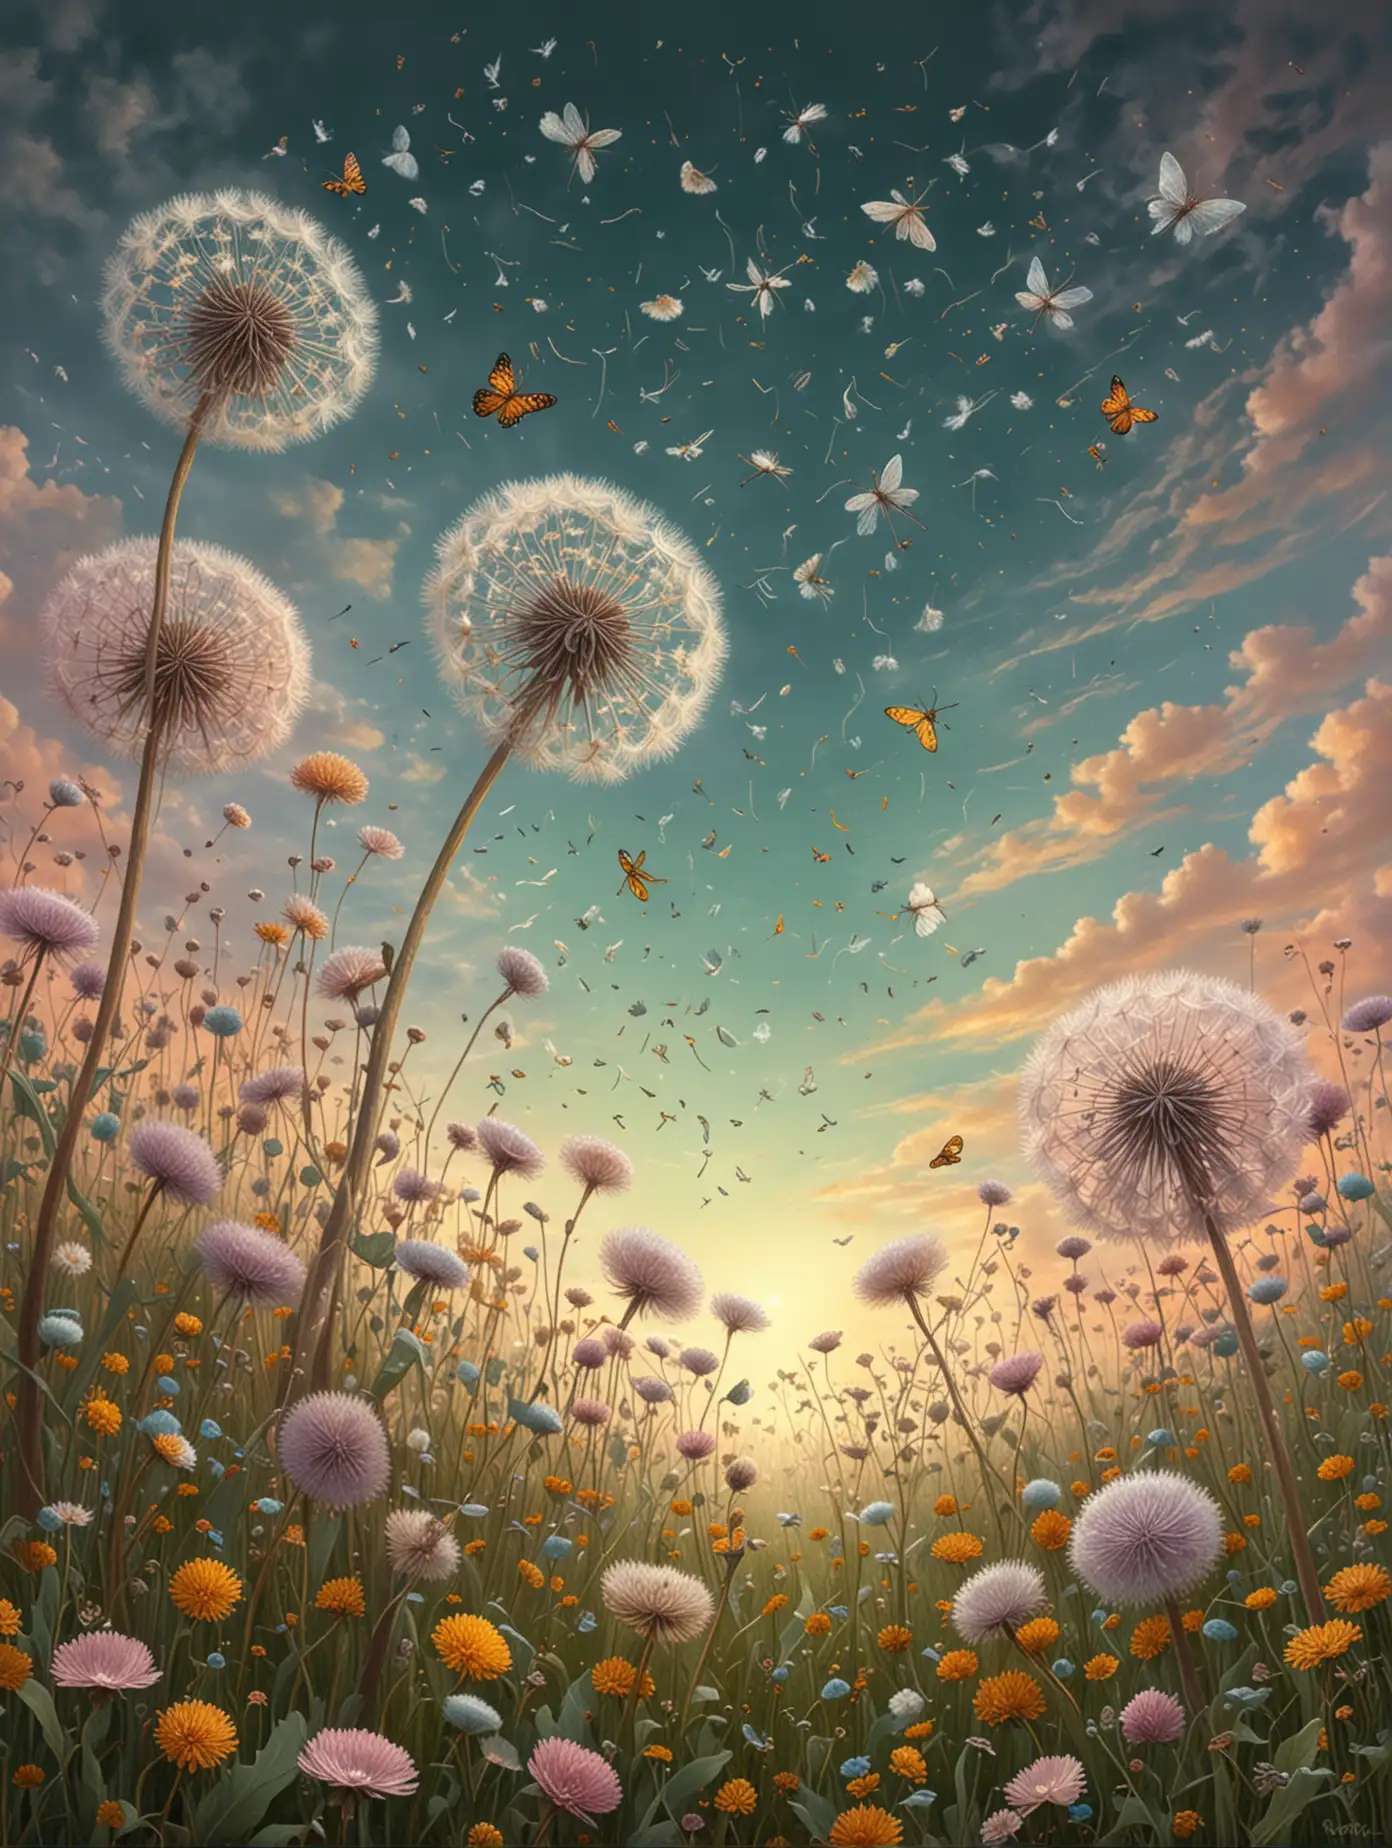 Fluffy Dandelion Field with Mystical Insects in Pastel Vintage Style